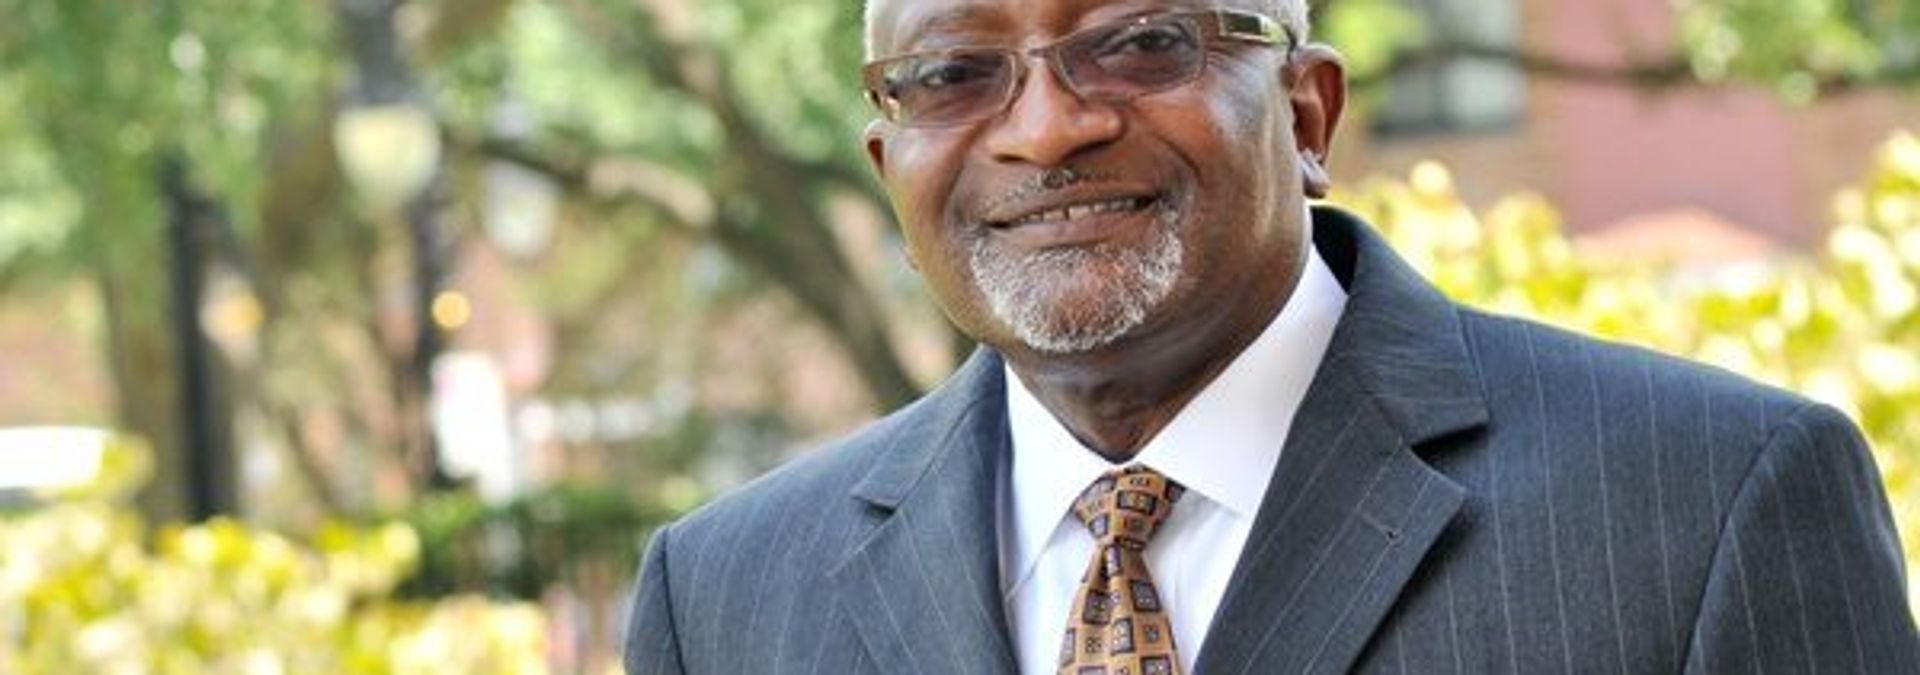 Dr. Robert Bullard is known as "the father of environmental justice." Photo: Texas Southern University.